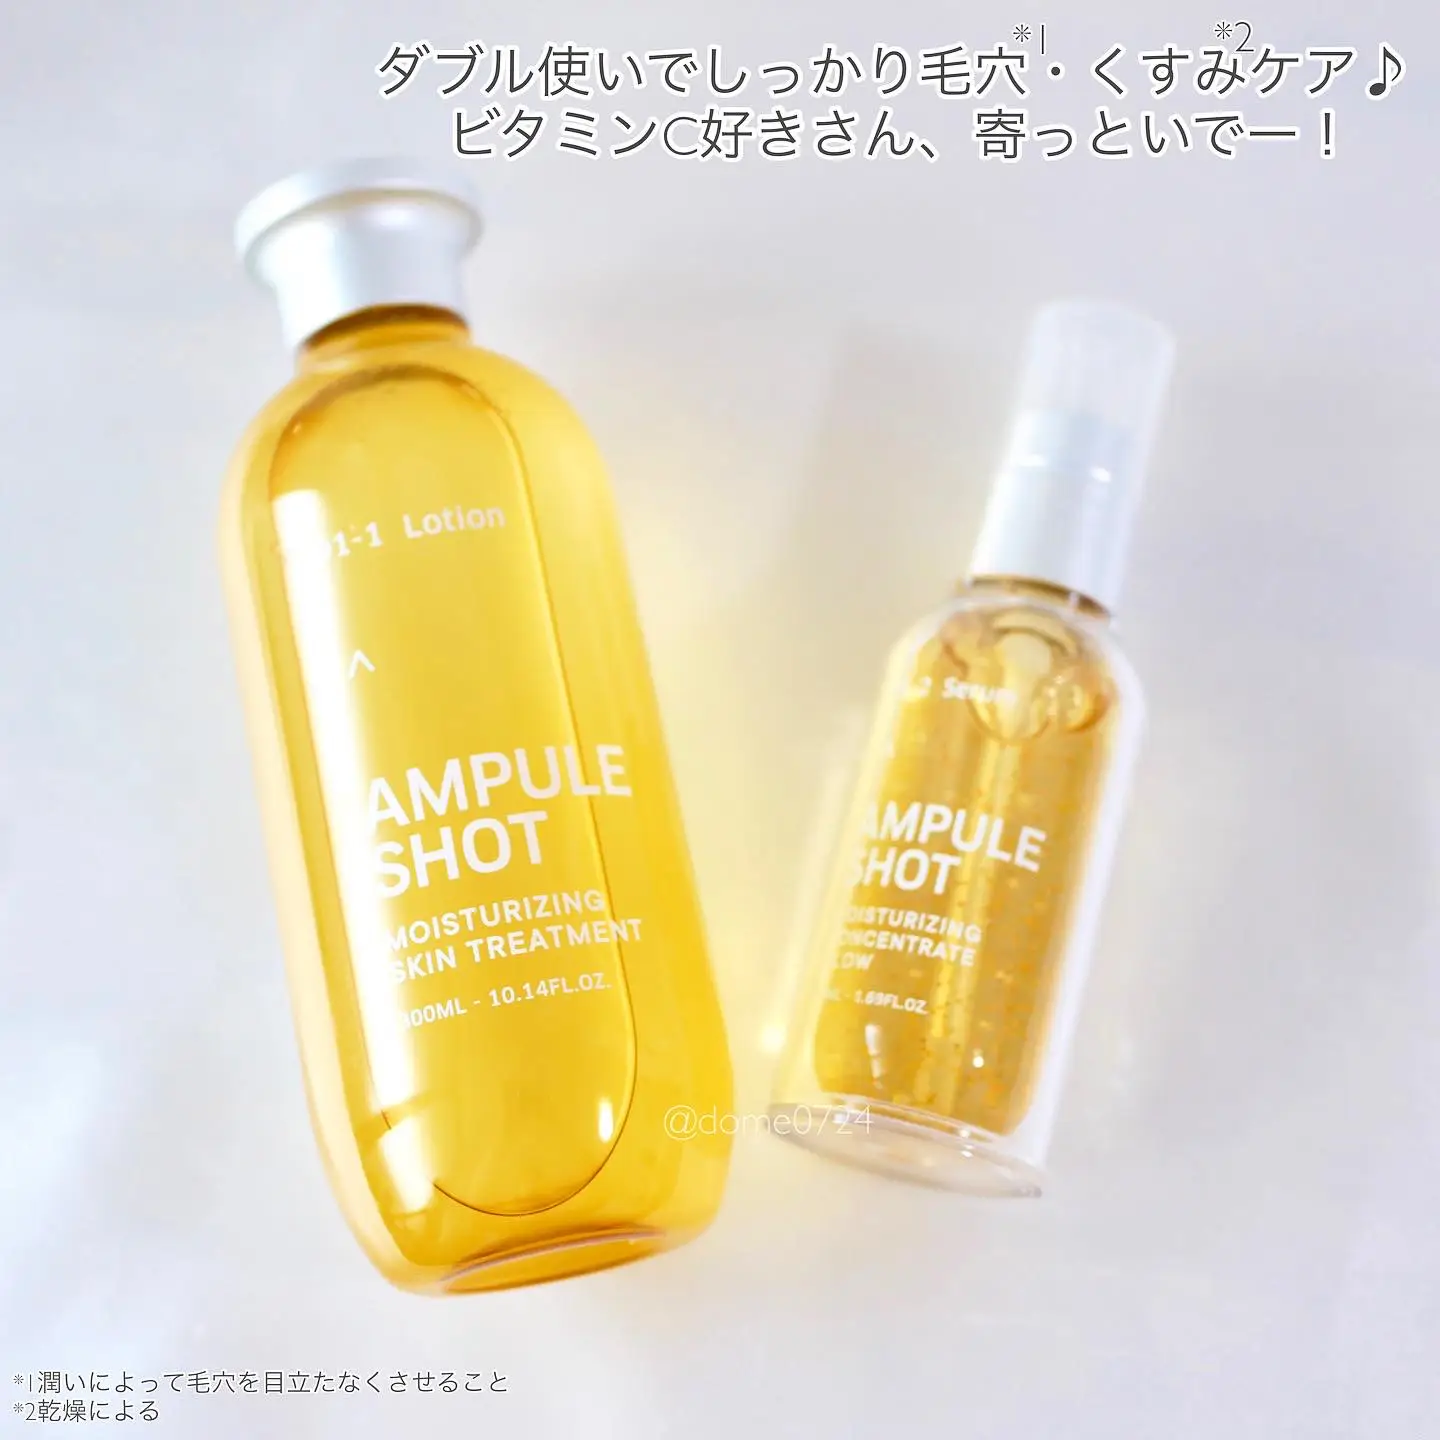 Review Serum Ample: N 2 formulas used💓💓🌟, Gallery posted by softsaloft